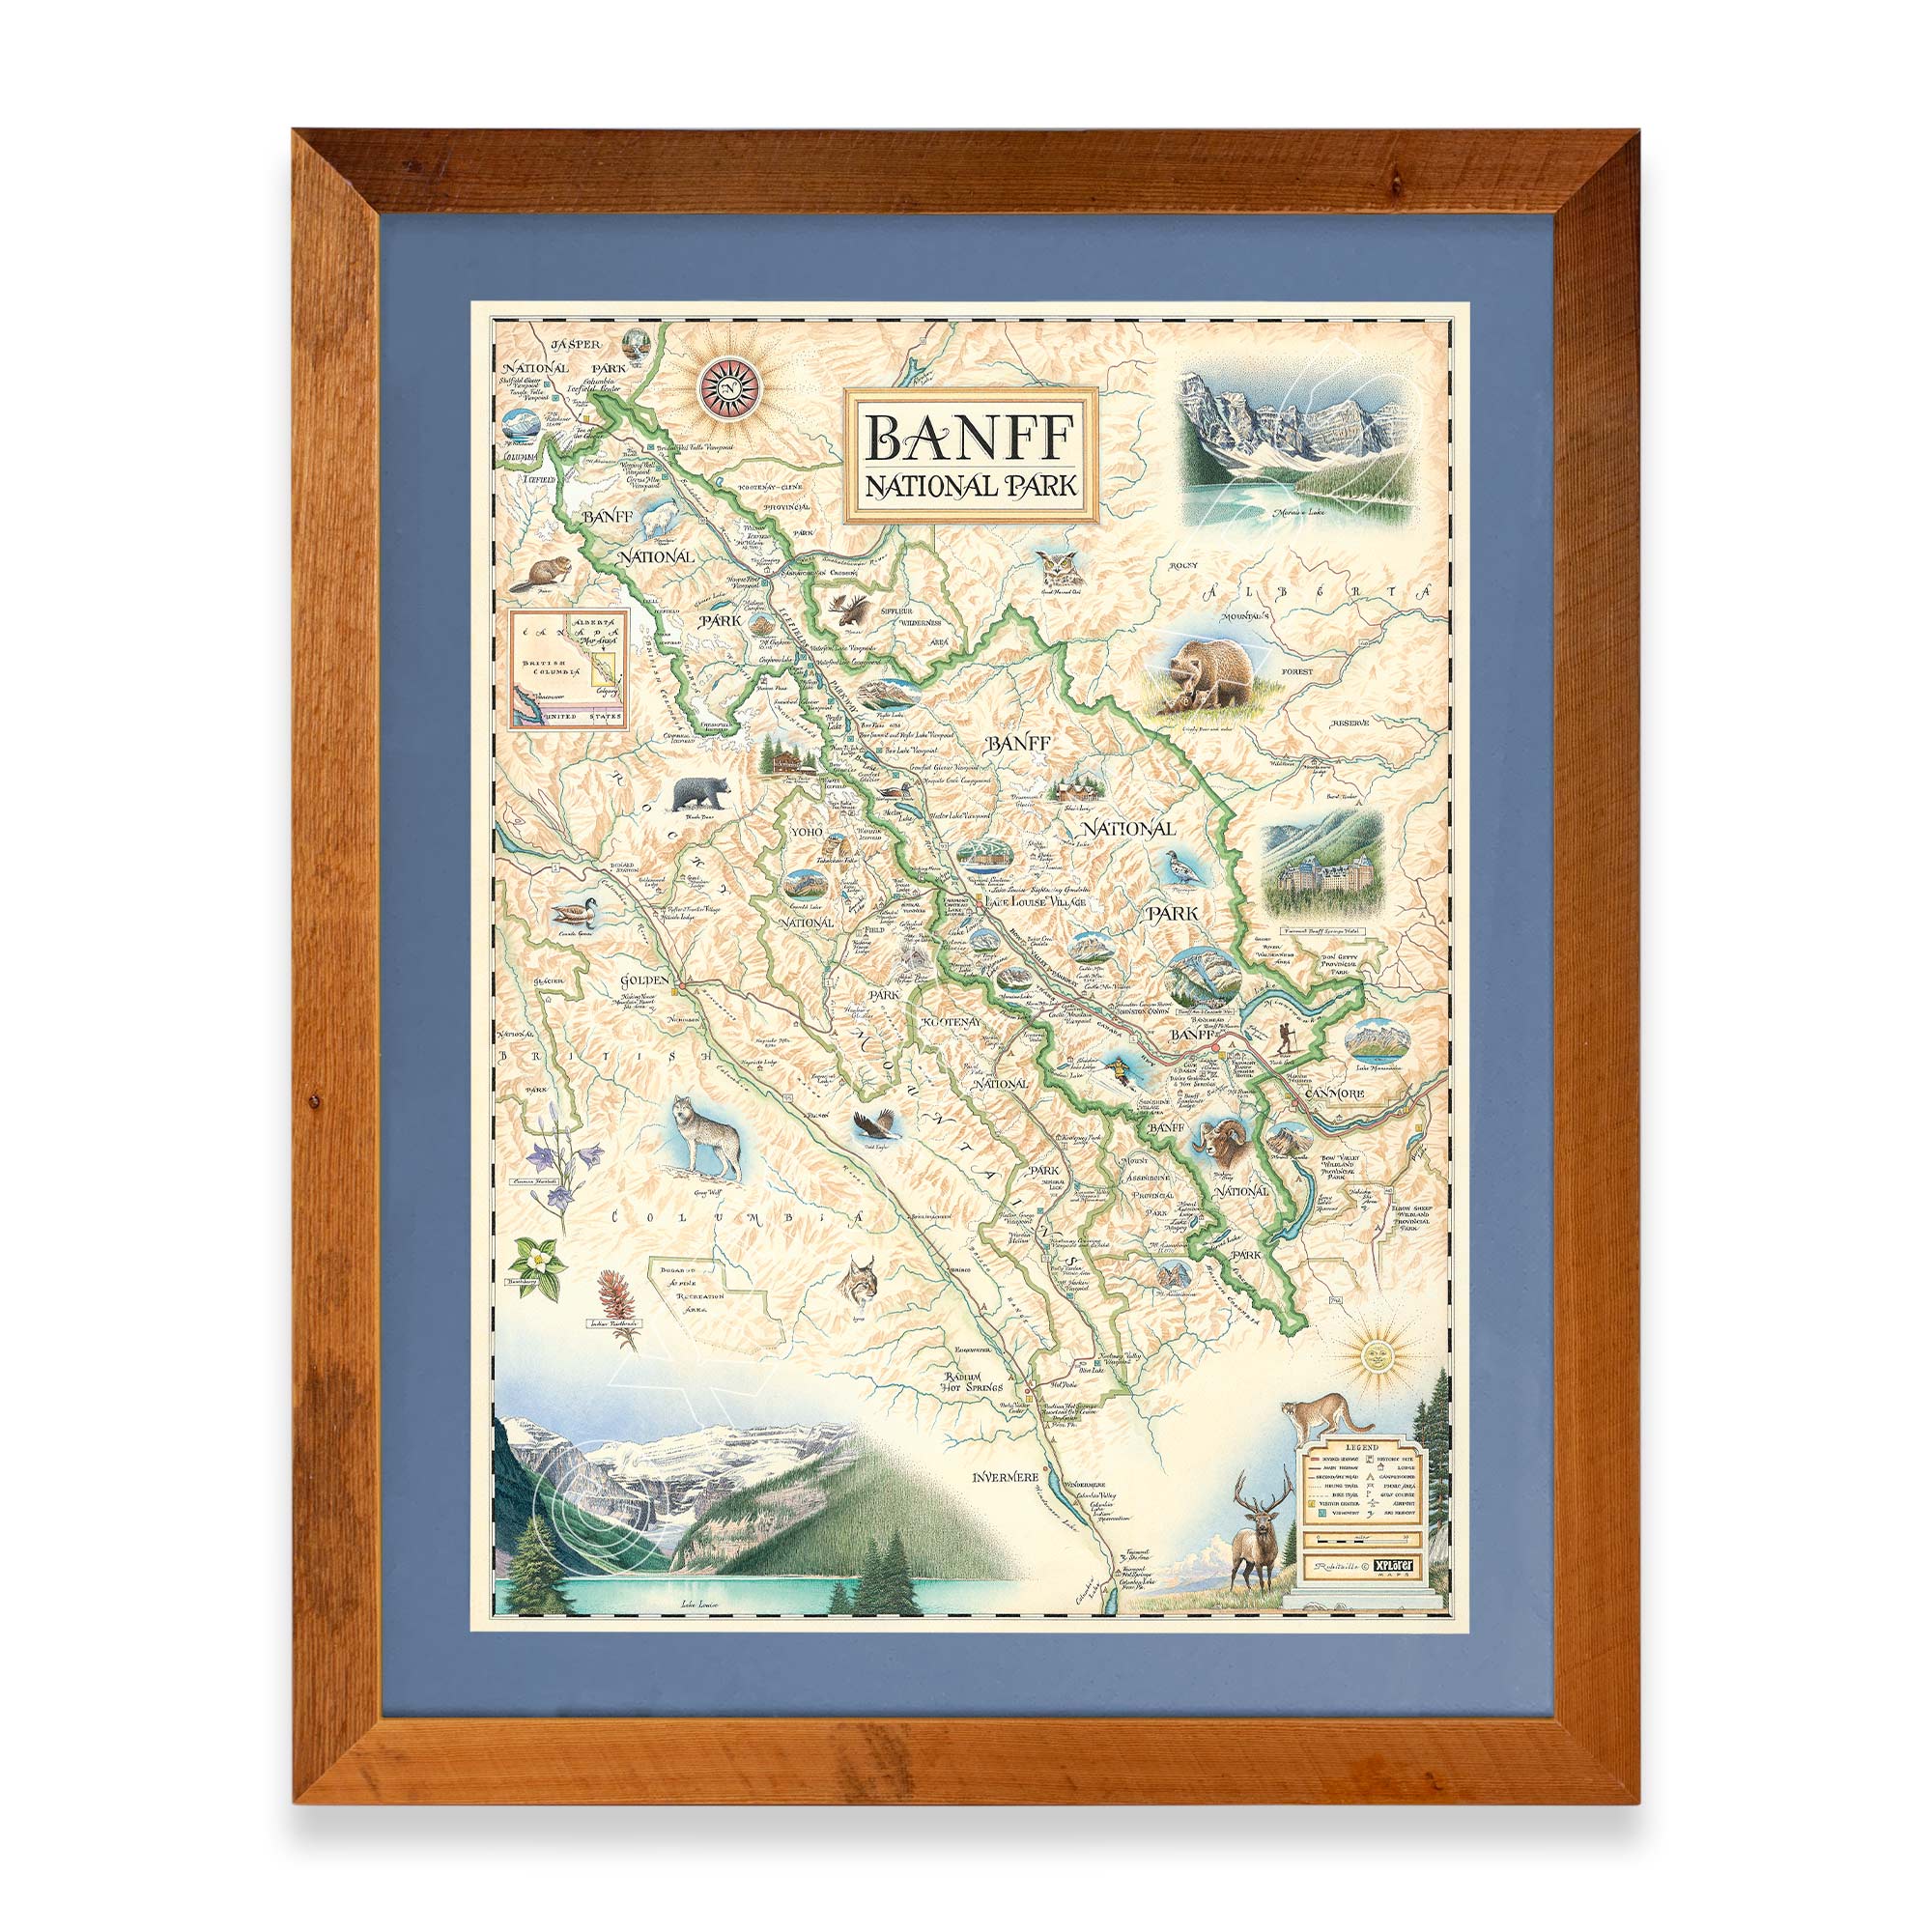 Banff National Park hand-drawn map in a Montana Flathead Lake reclaimed larch wood frame and blue mat. 